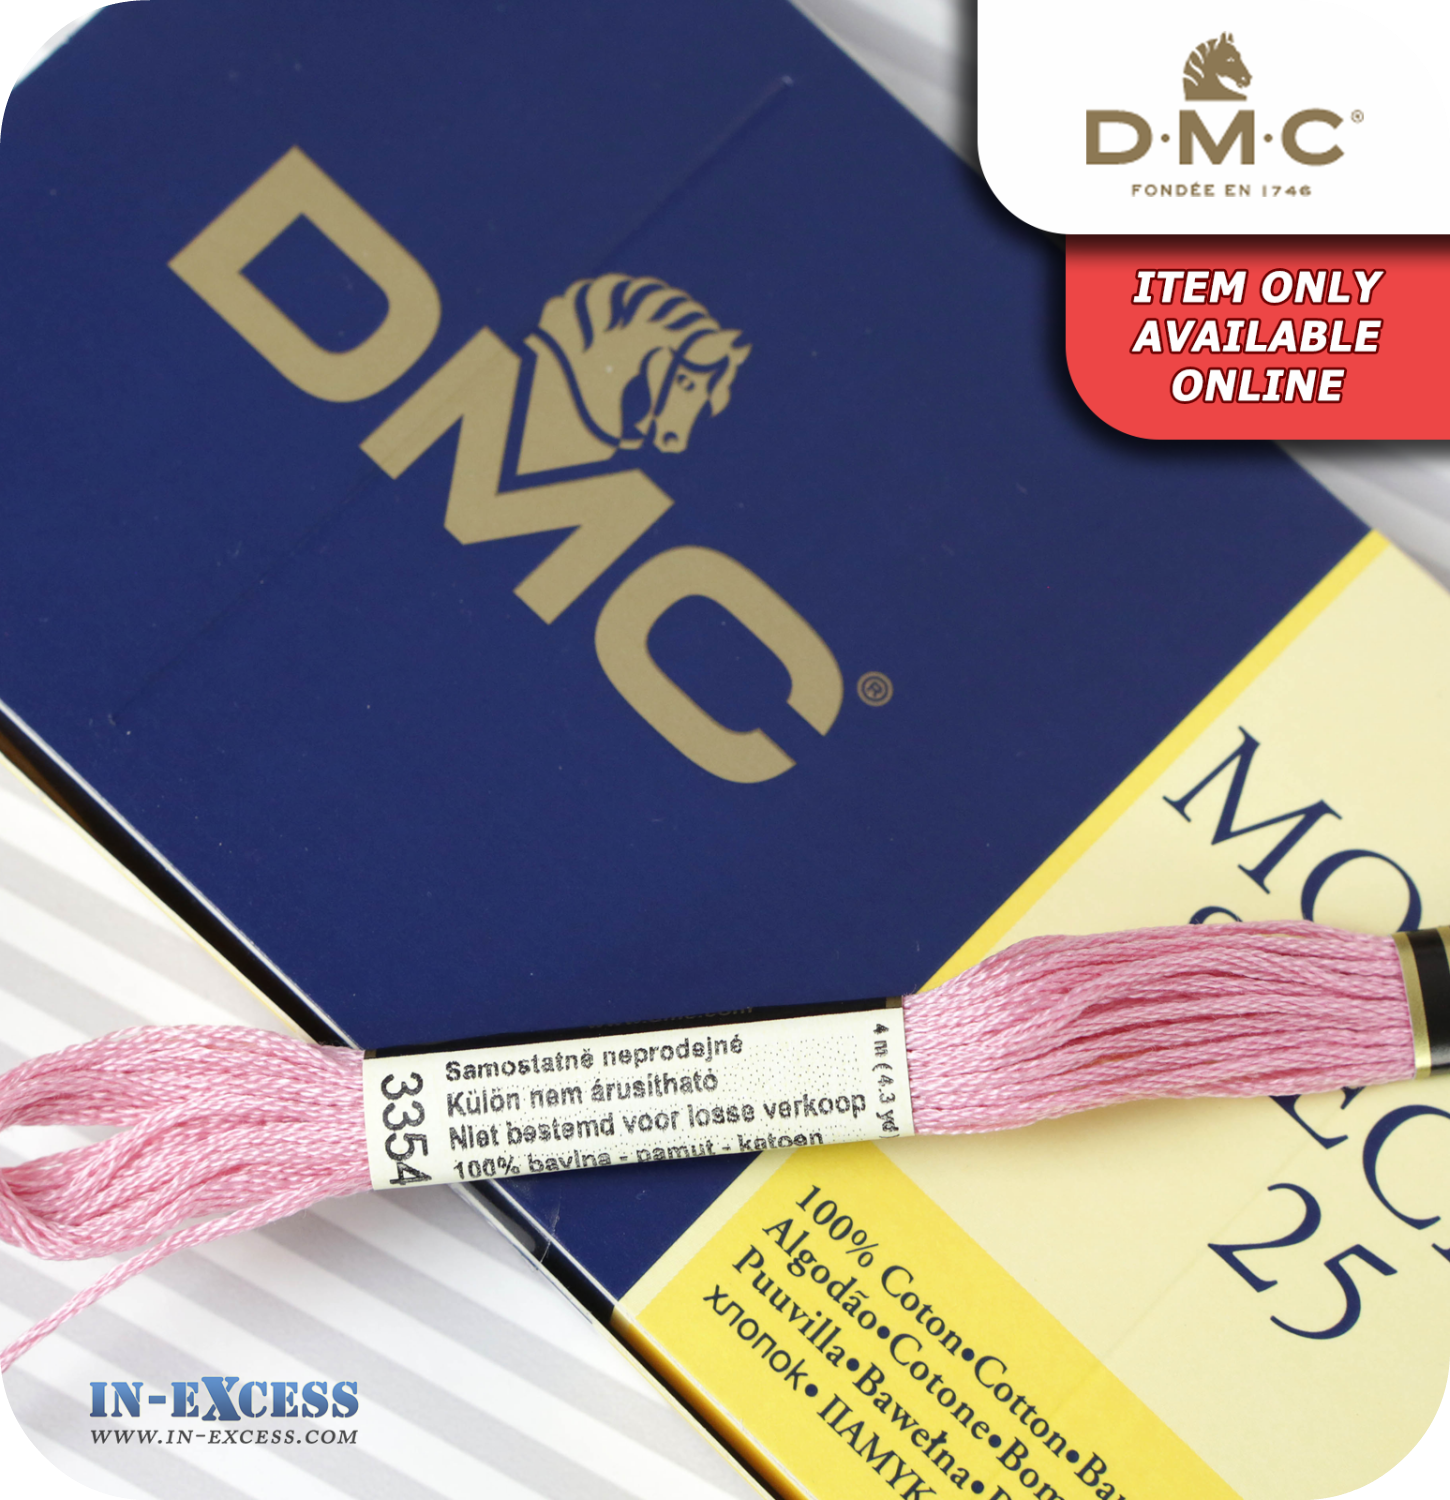 DMC Mouliné Special 25 Cotton Thread - Pack of 16 Skeins (3354 Dusty Rose)